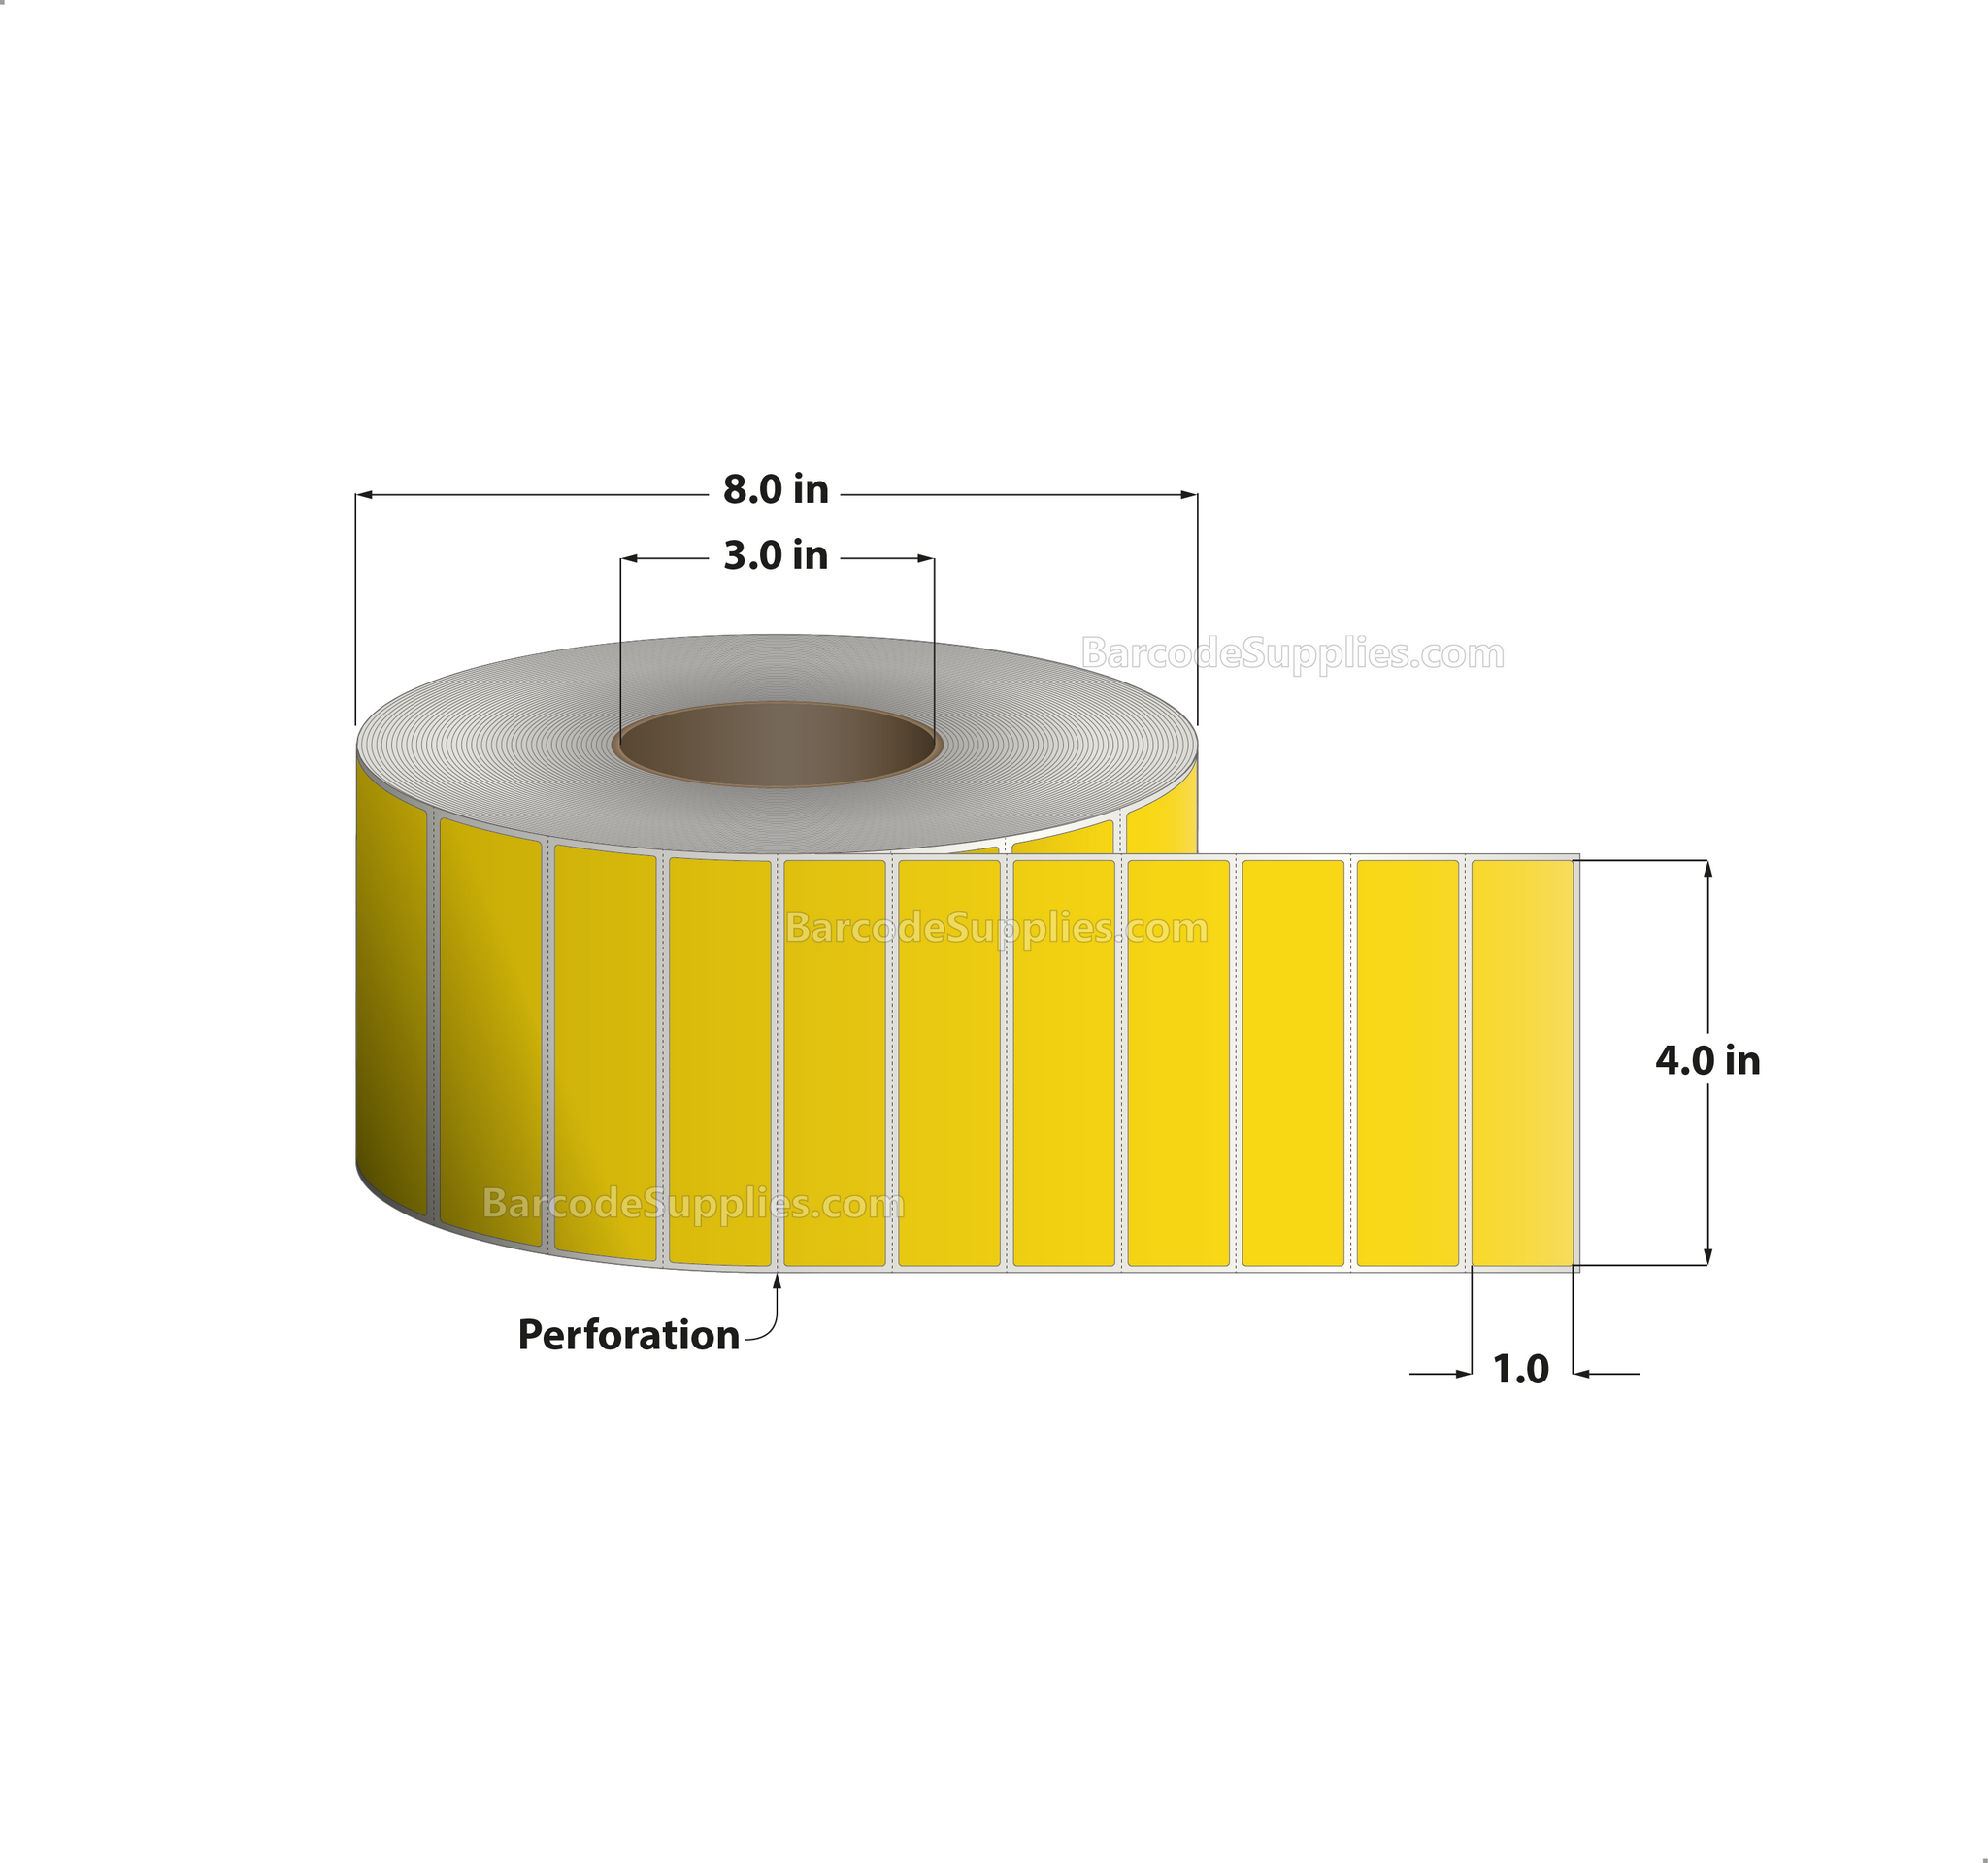 4 x 1 Thermal Transfer Pantone Yellow Labels With Permanent Adhesive - Perforated - 5500 Labels Per Roll - Carton Of 4 Rolls - 22000 Labels Total - MPN: RFC-4-1-5500-YL